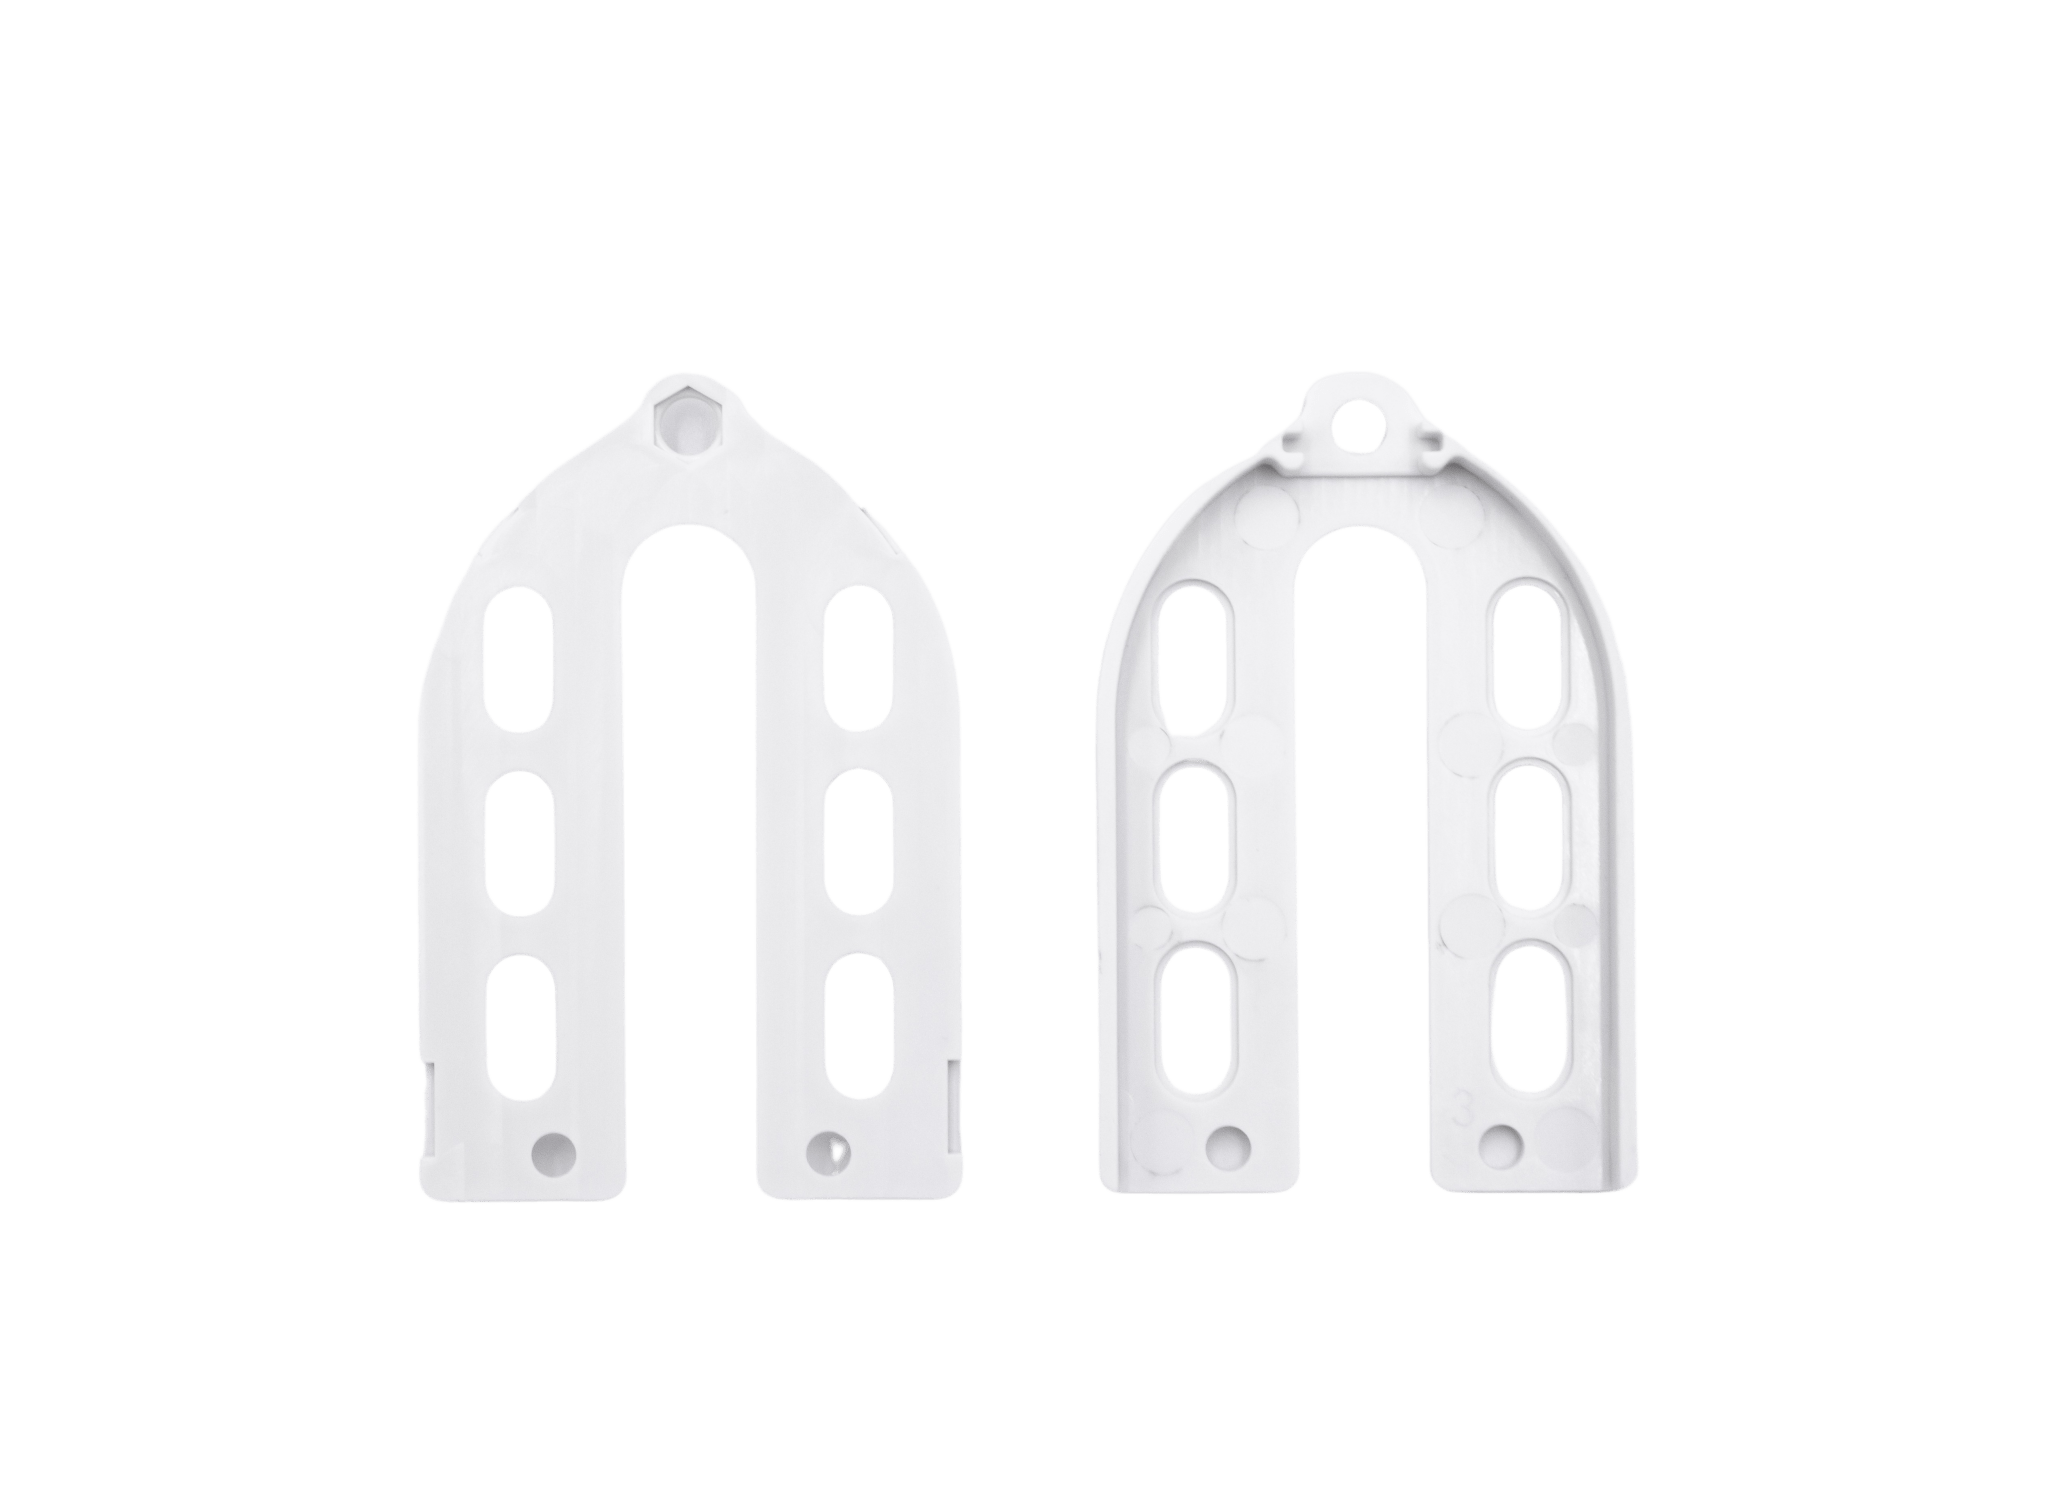 Top and Bottom view of Hinge Brackets